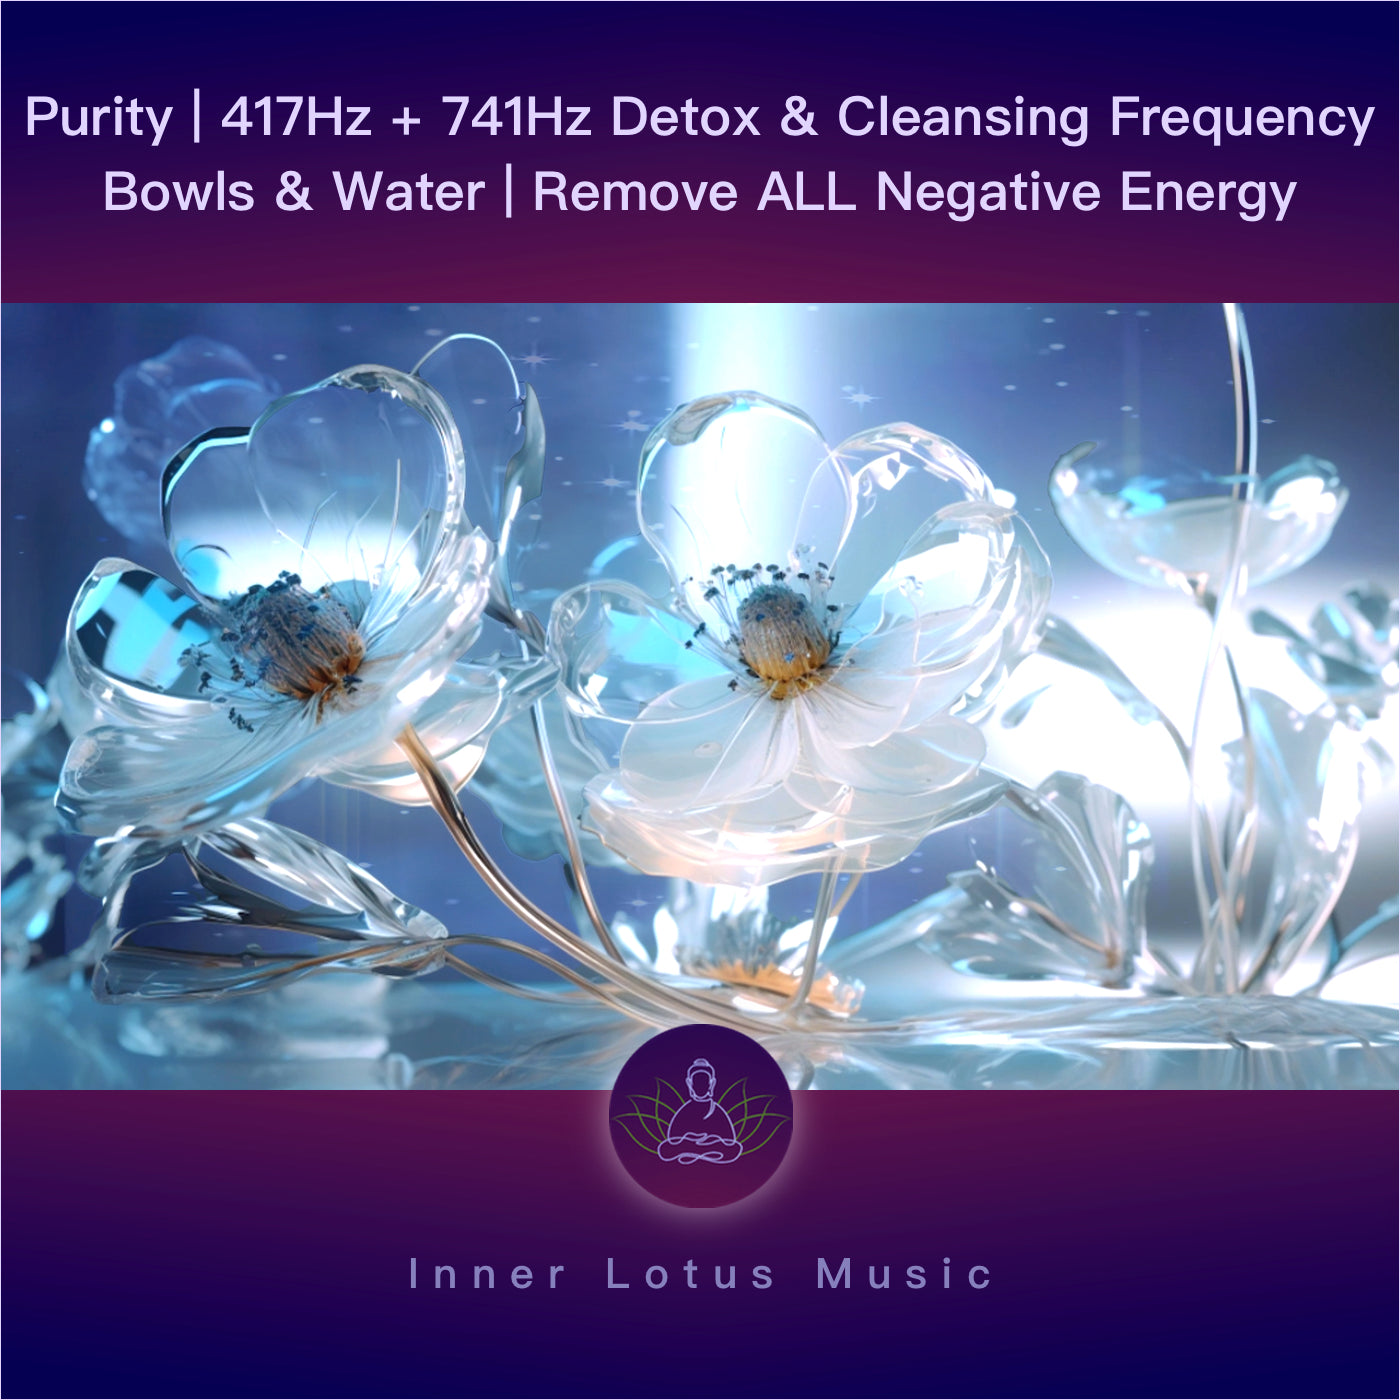 Purity | 417Hz + 741Hz | Detox & Cleansing Frequency Bowls & Water | Remove ALL Negative Energy